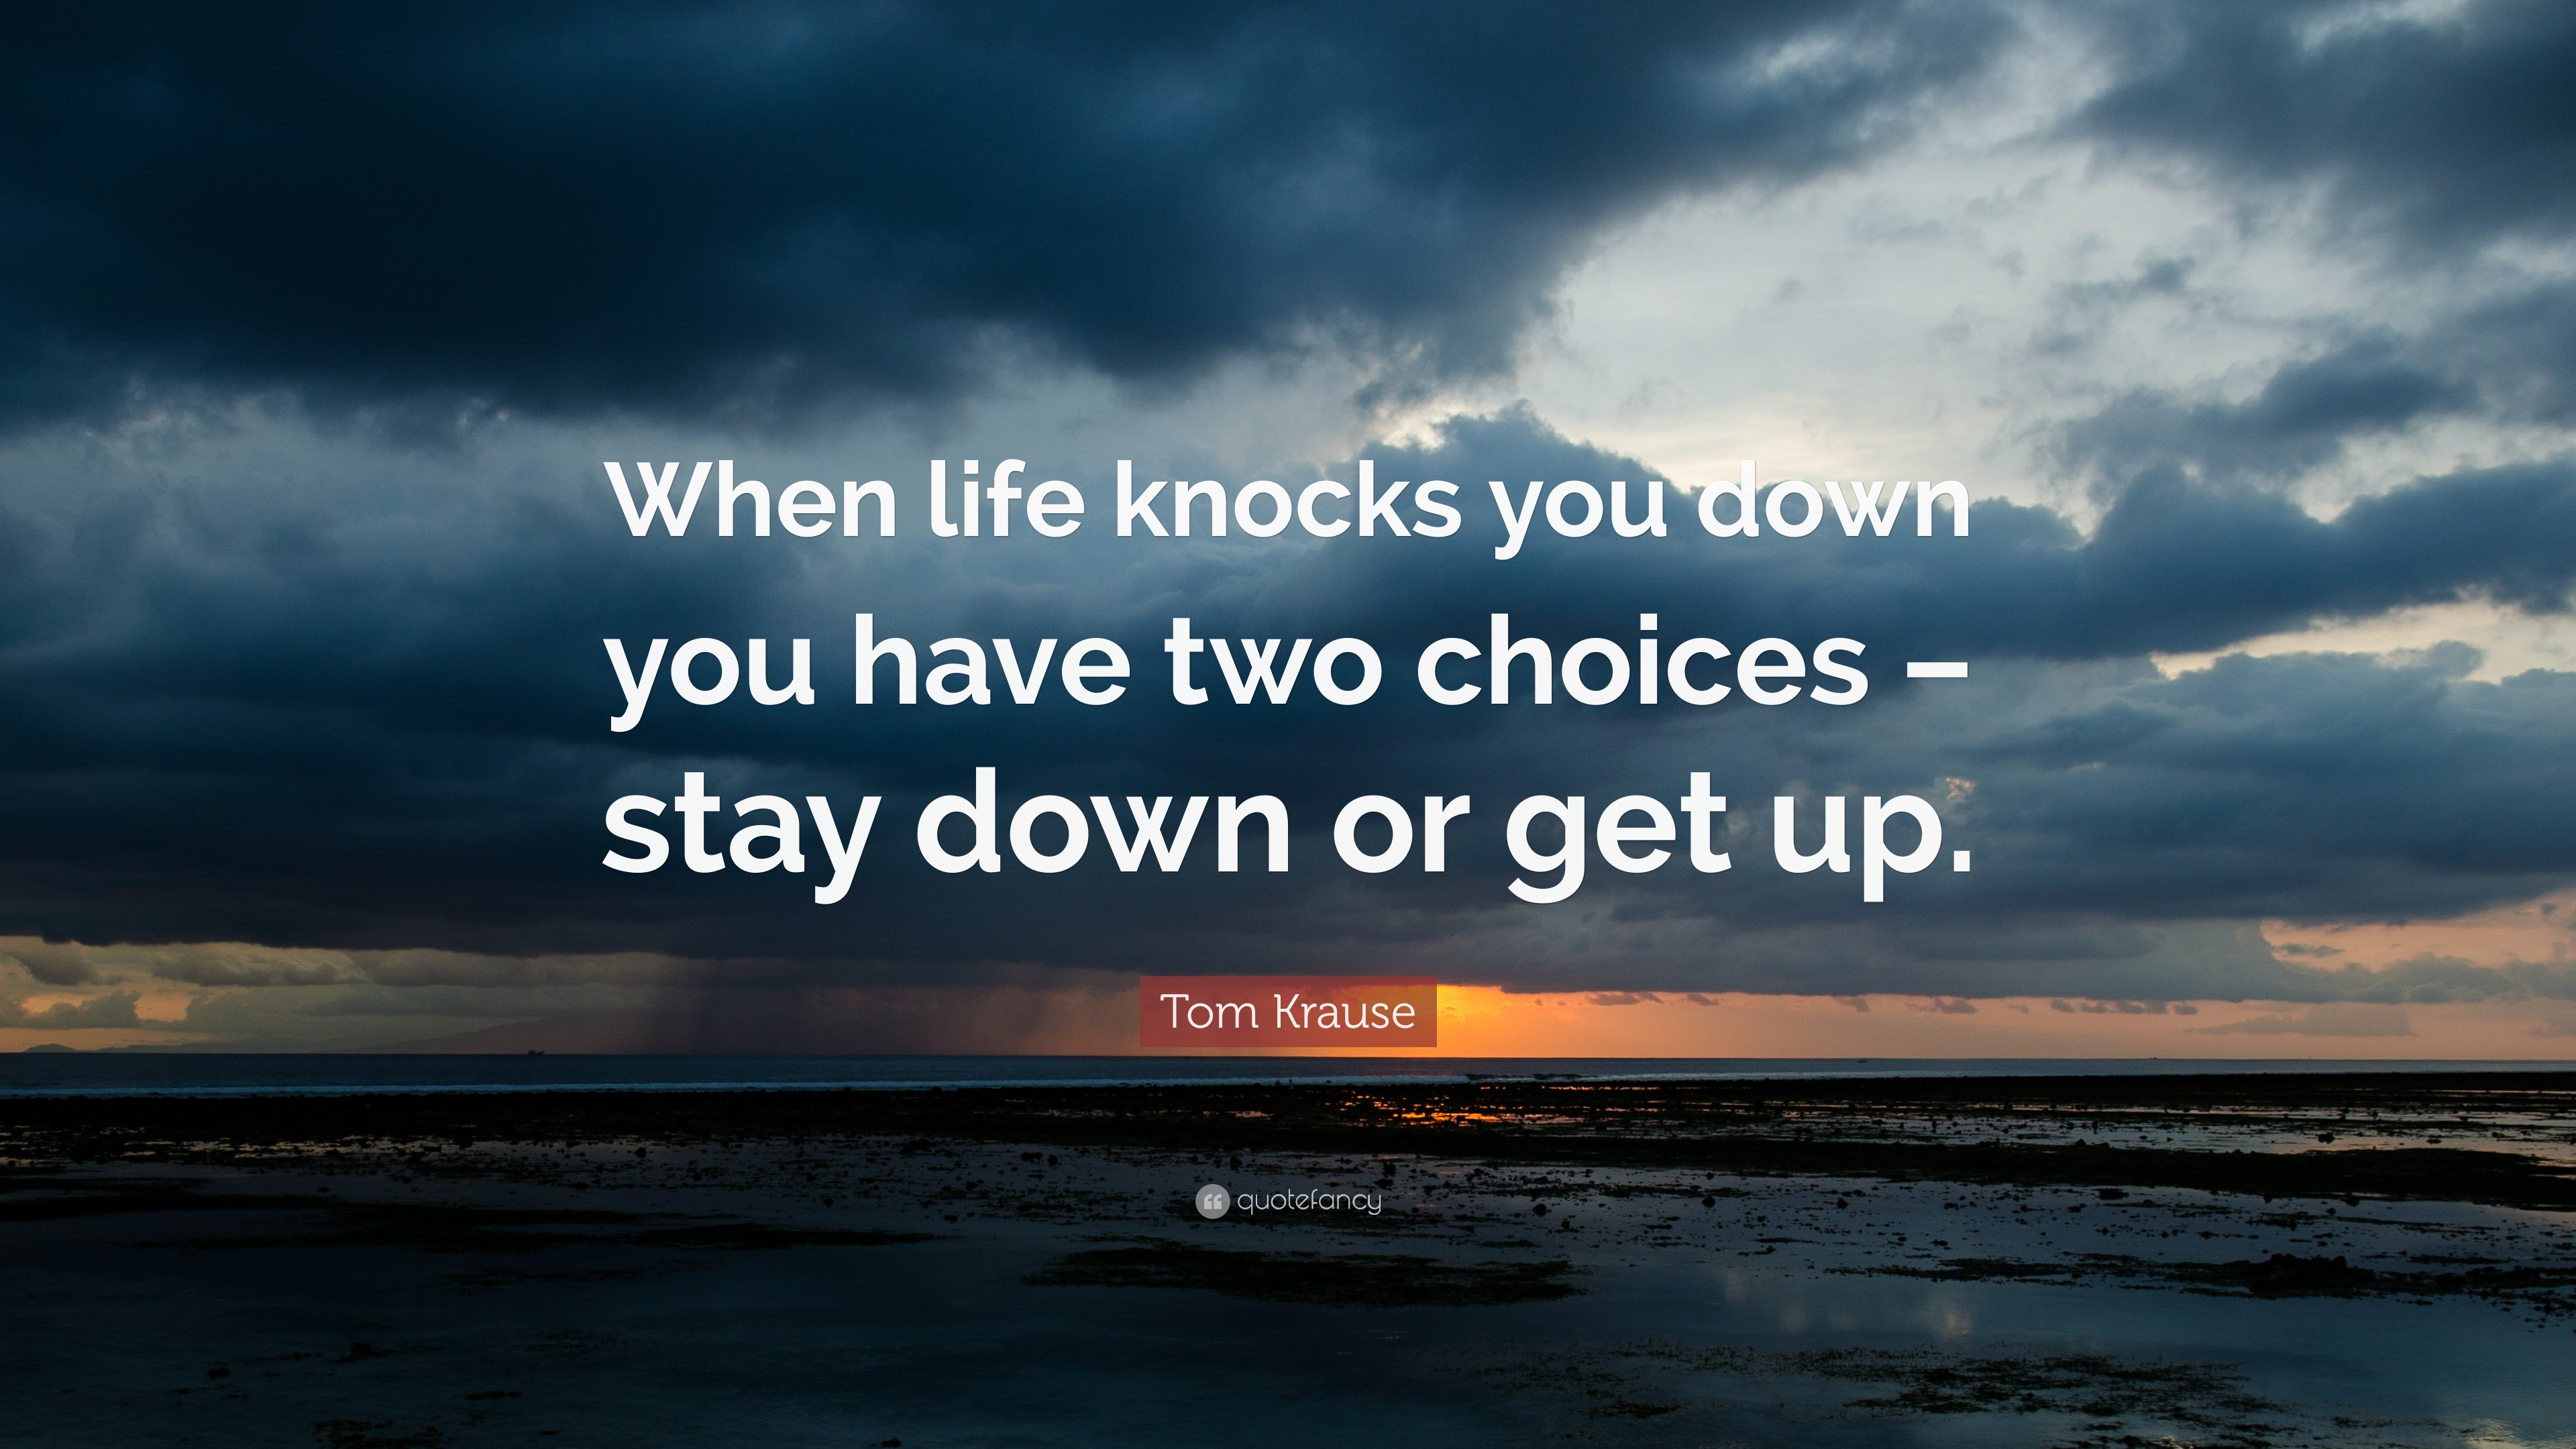 1699338 Tom Krause Quote When life knocks you down you have two choices